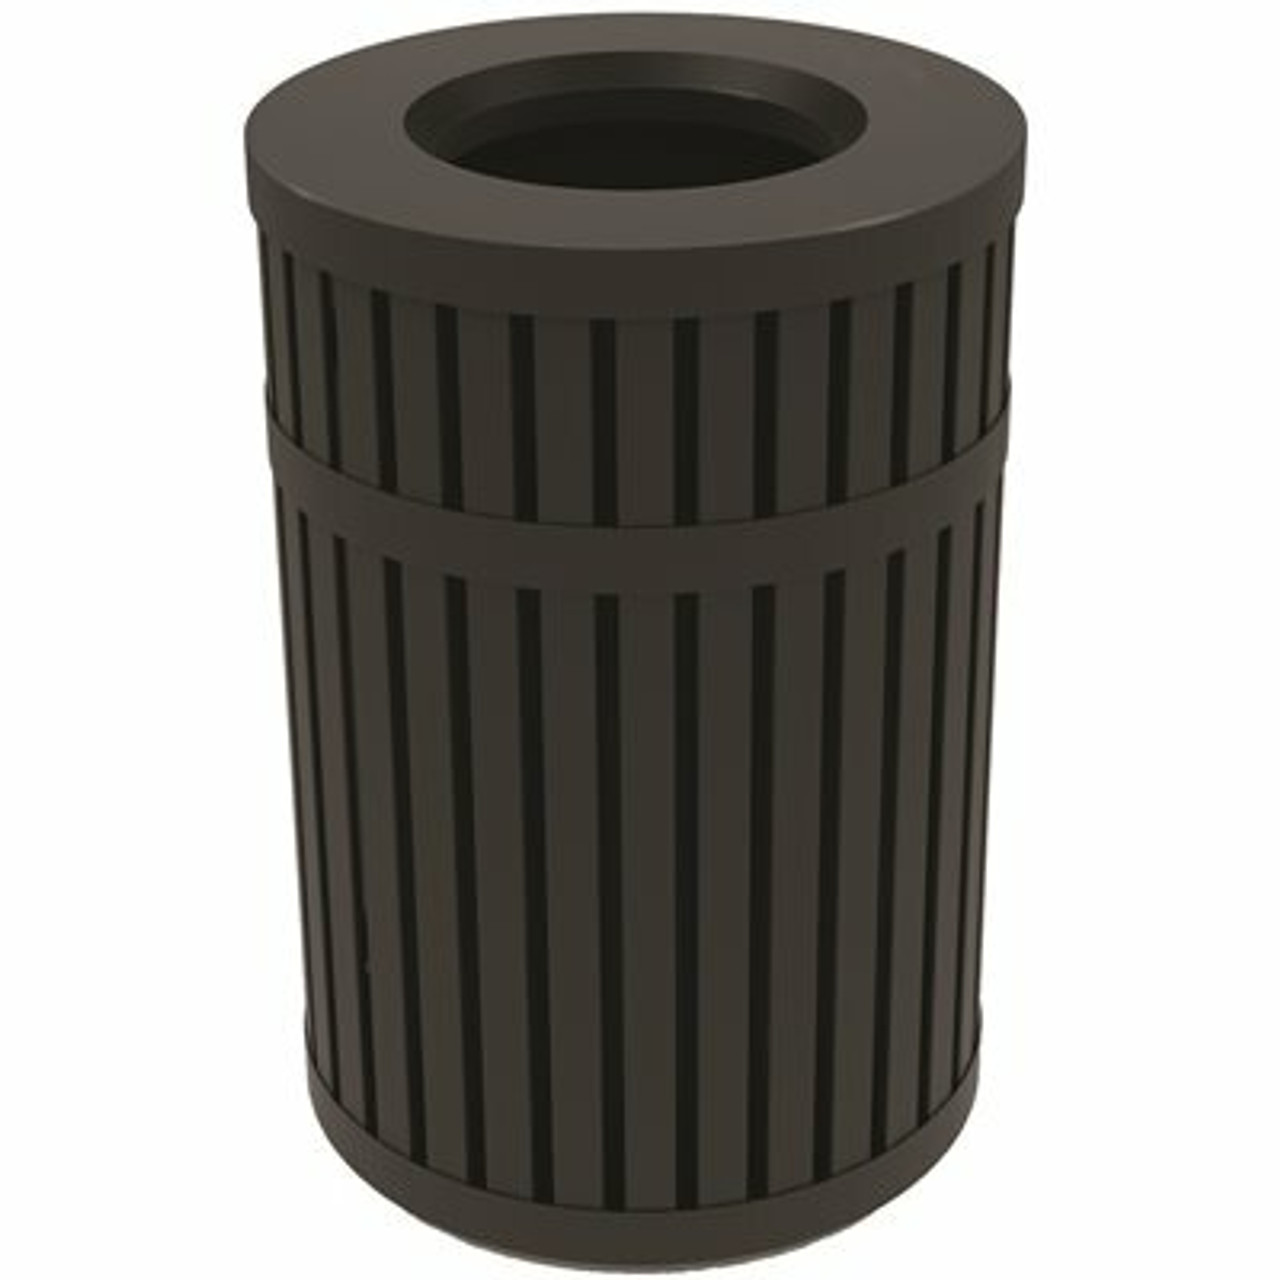 Archtec Parkview 3, 45 Gal. Black Round Trash Can